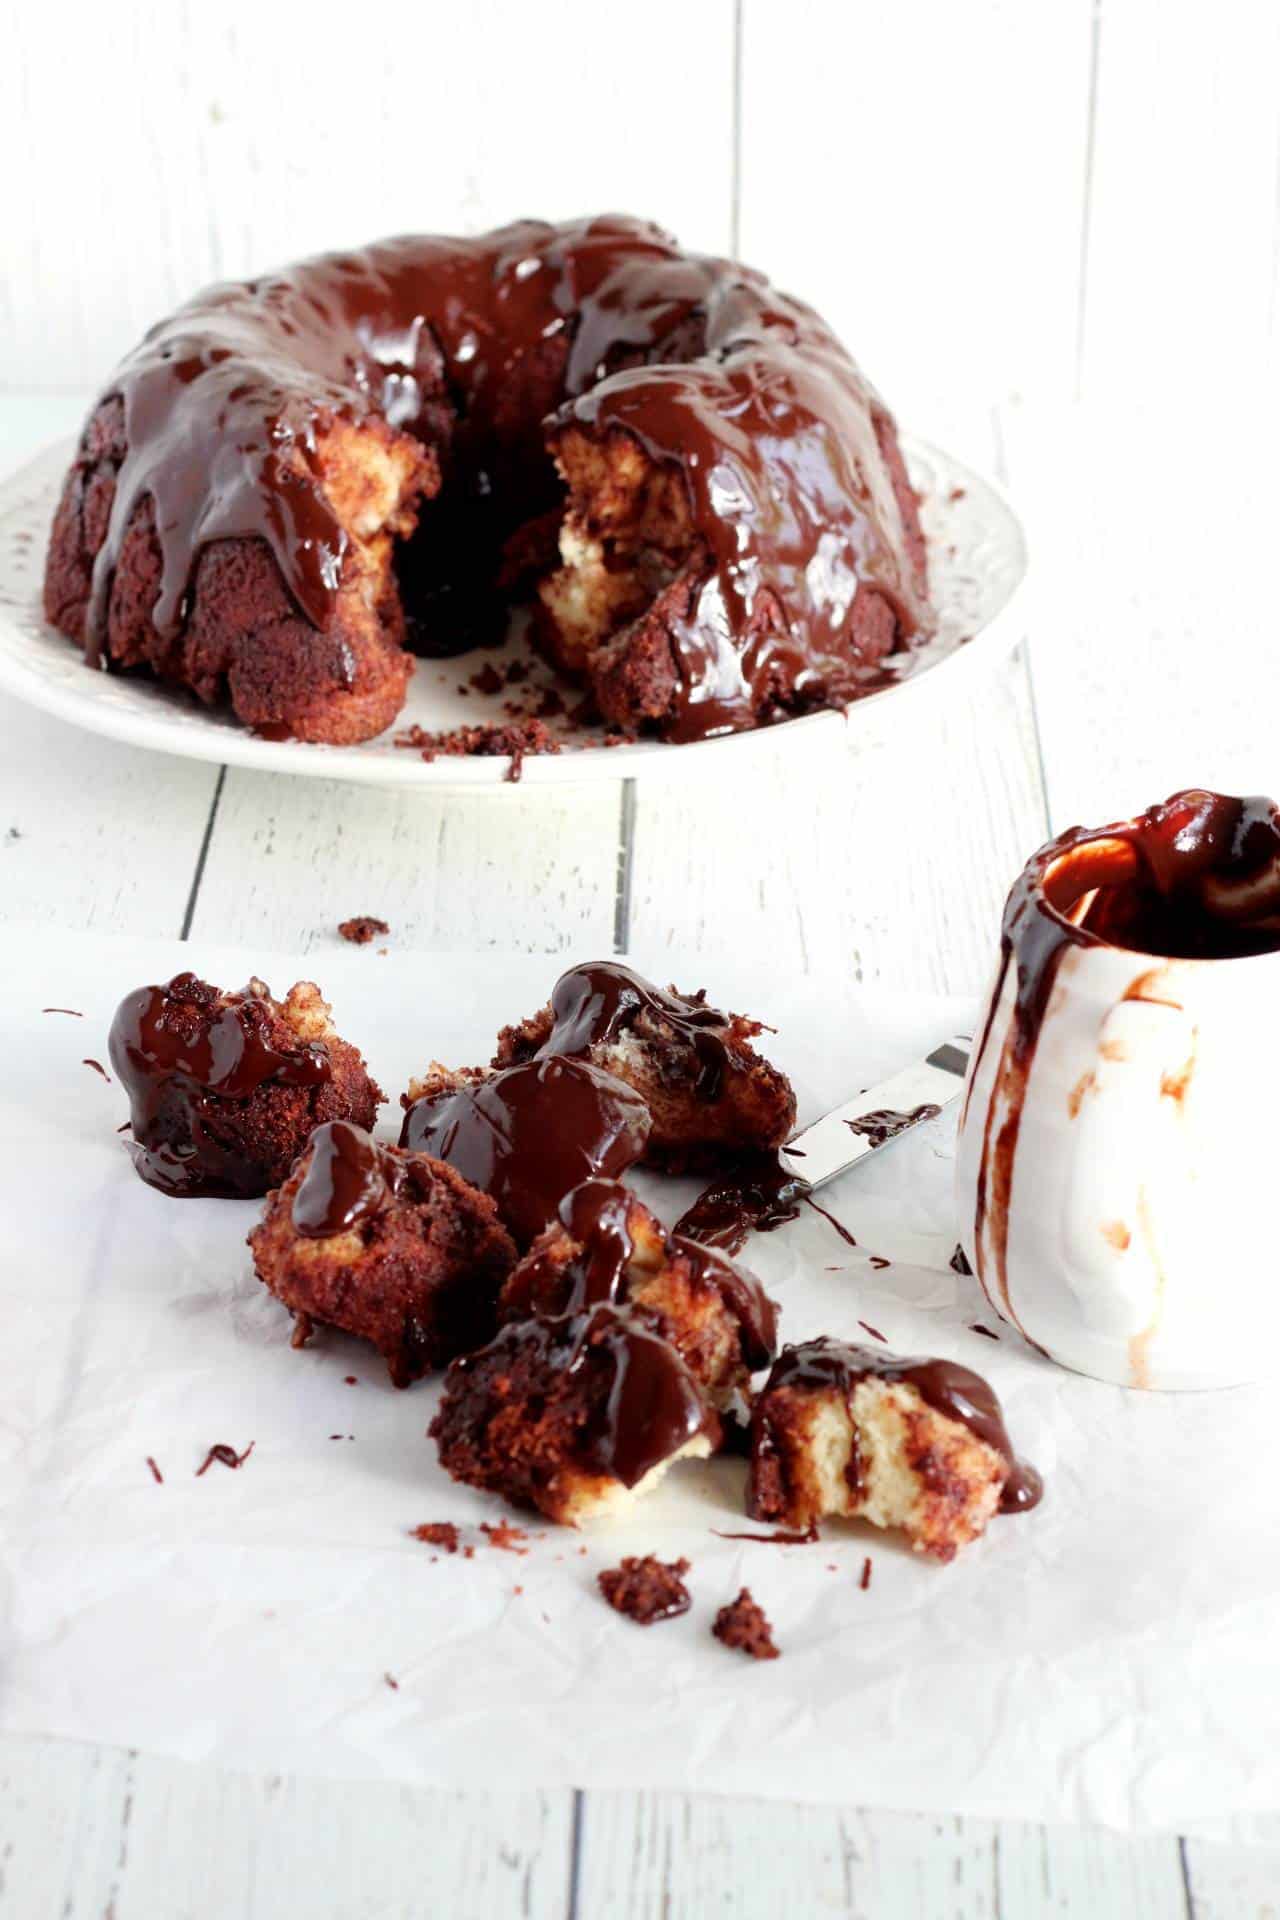 Pieces from monkey bread covered in chocolate glaze